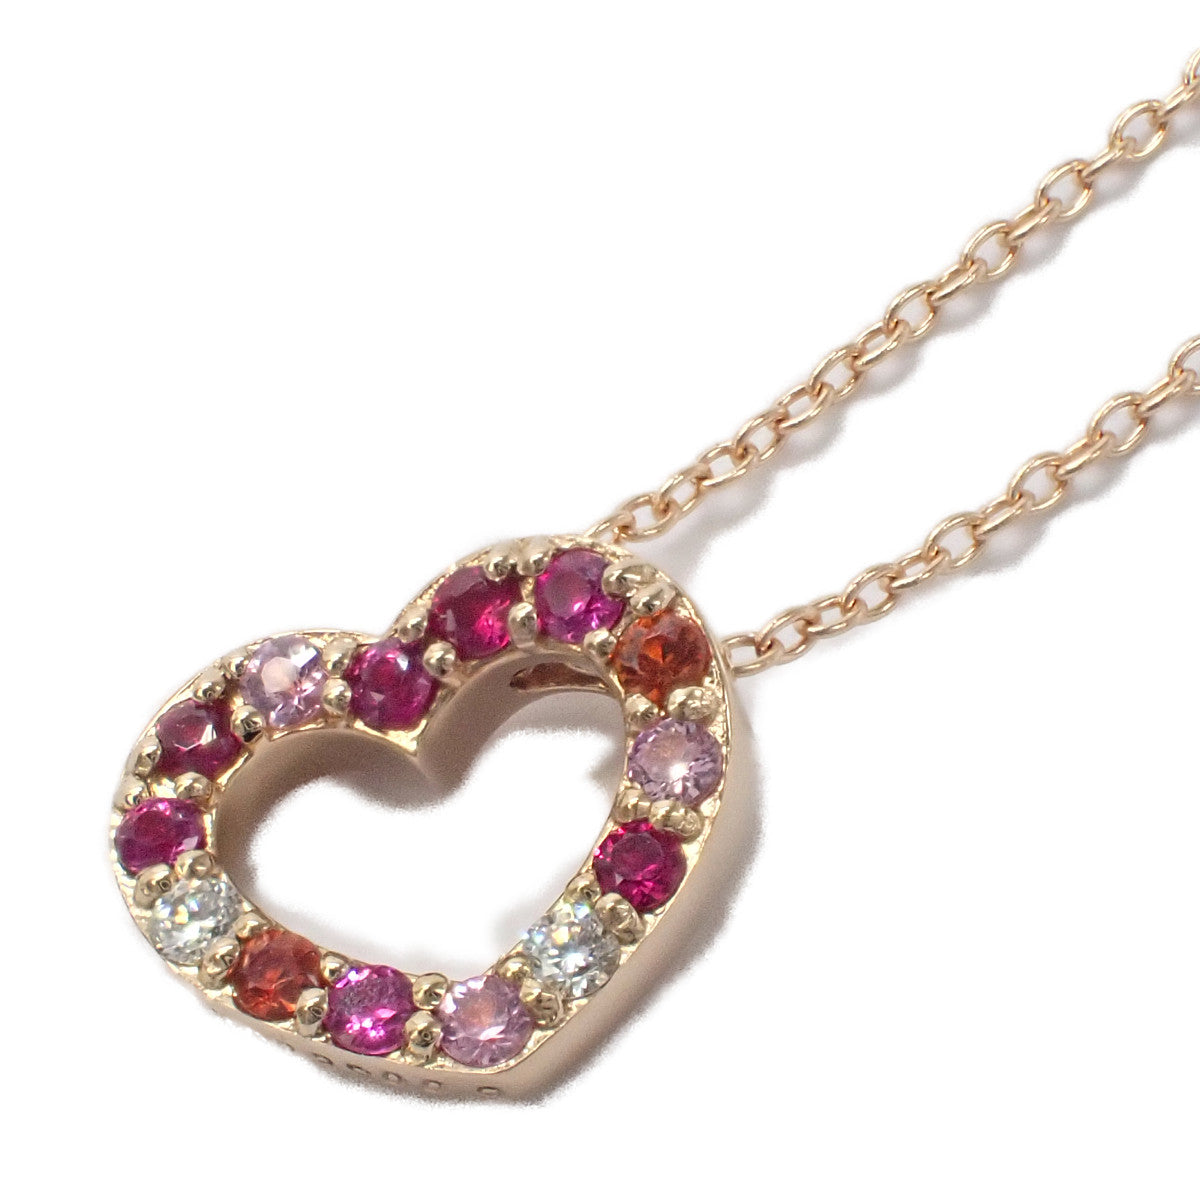 Ponte Vecchio Emozione Pompermo Heart Motif Necklace with Diamond 0.02ct, Ruby 0.03ct, Sapphire 0.09ct in K18 Pink Gold for Women (Used)